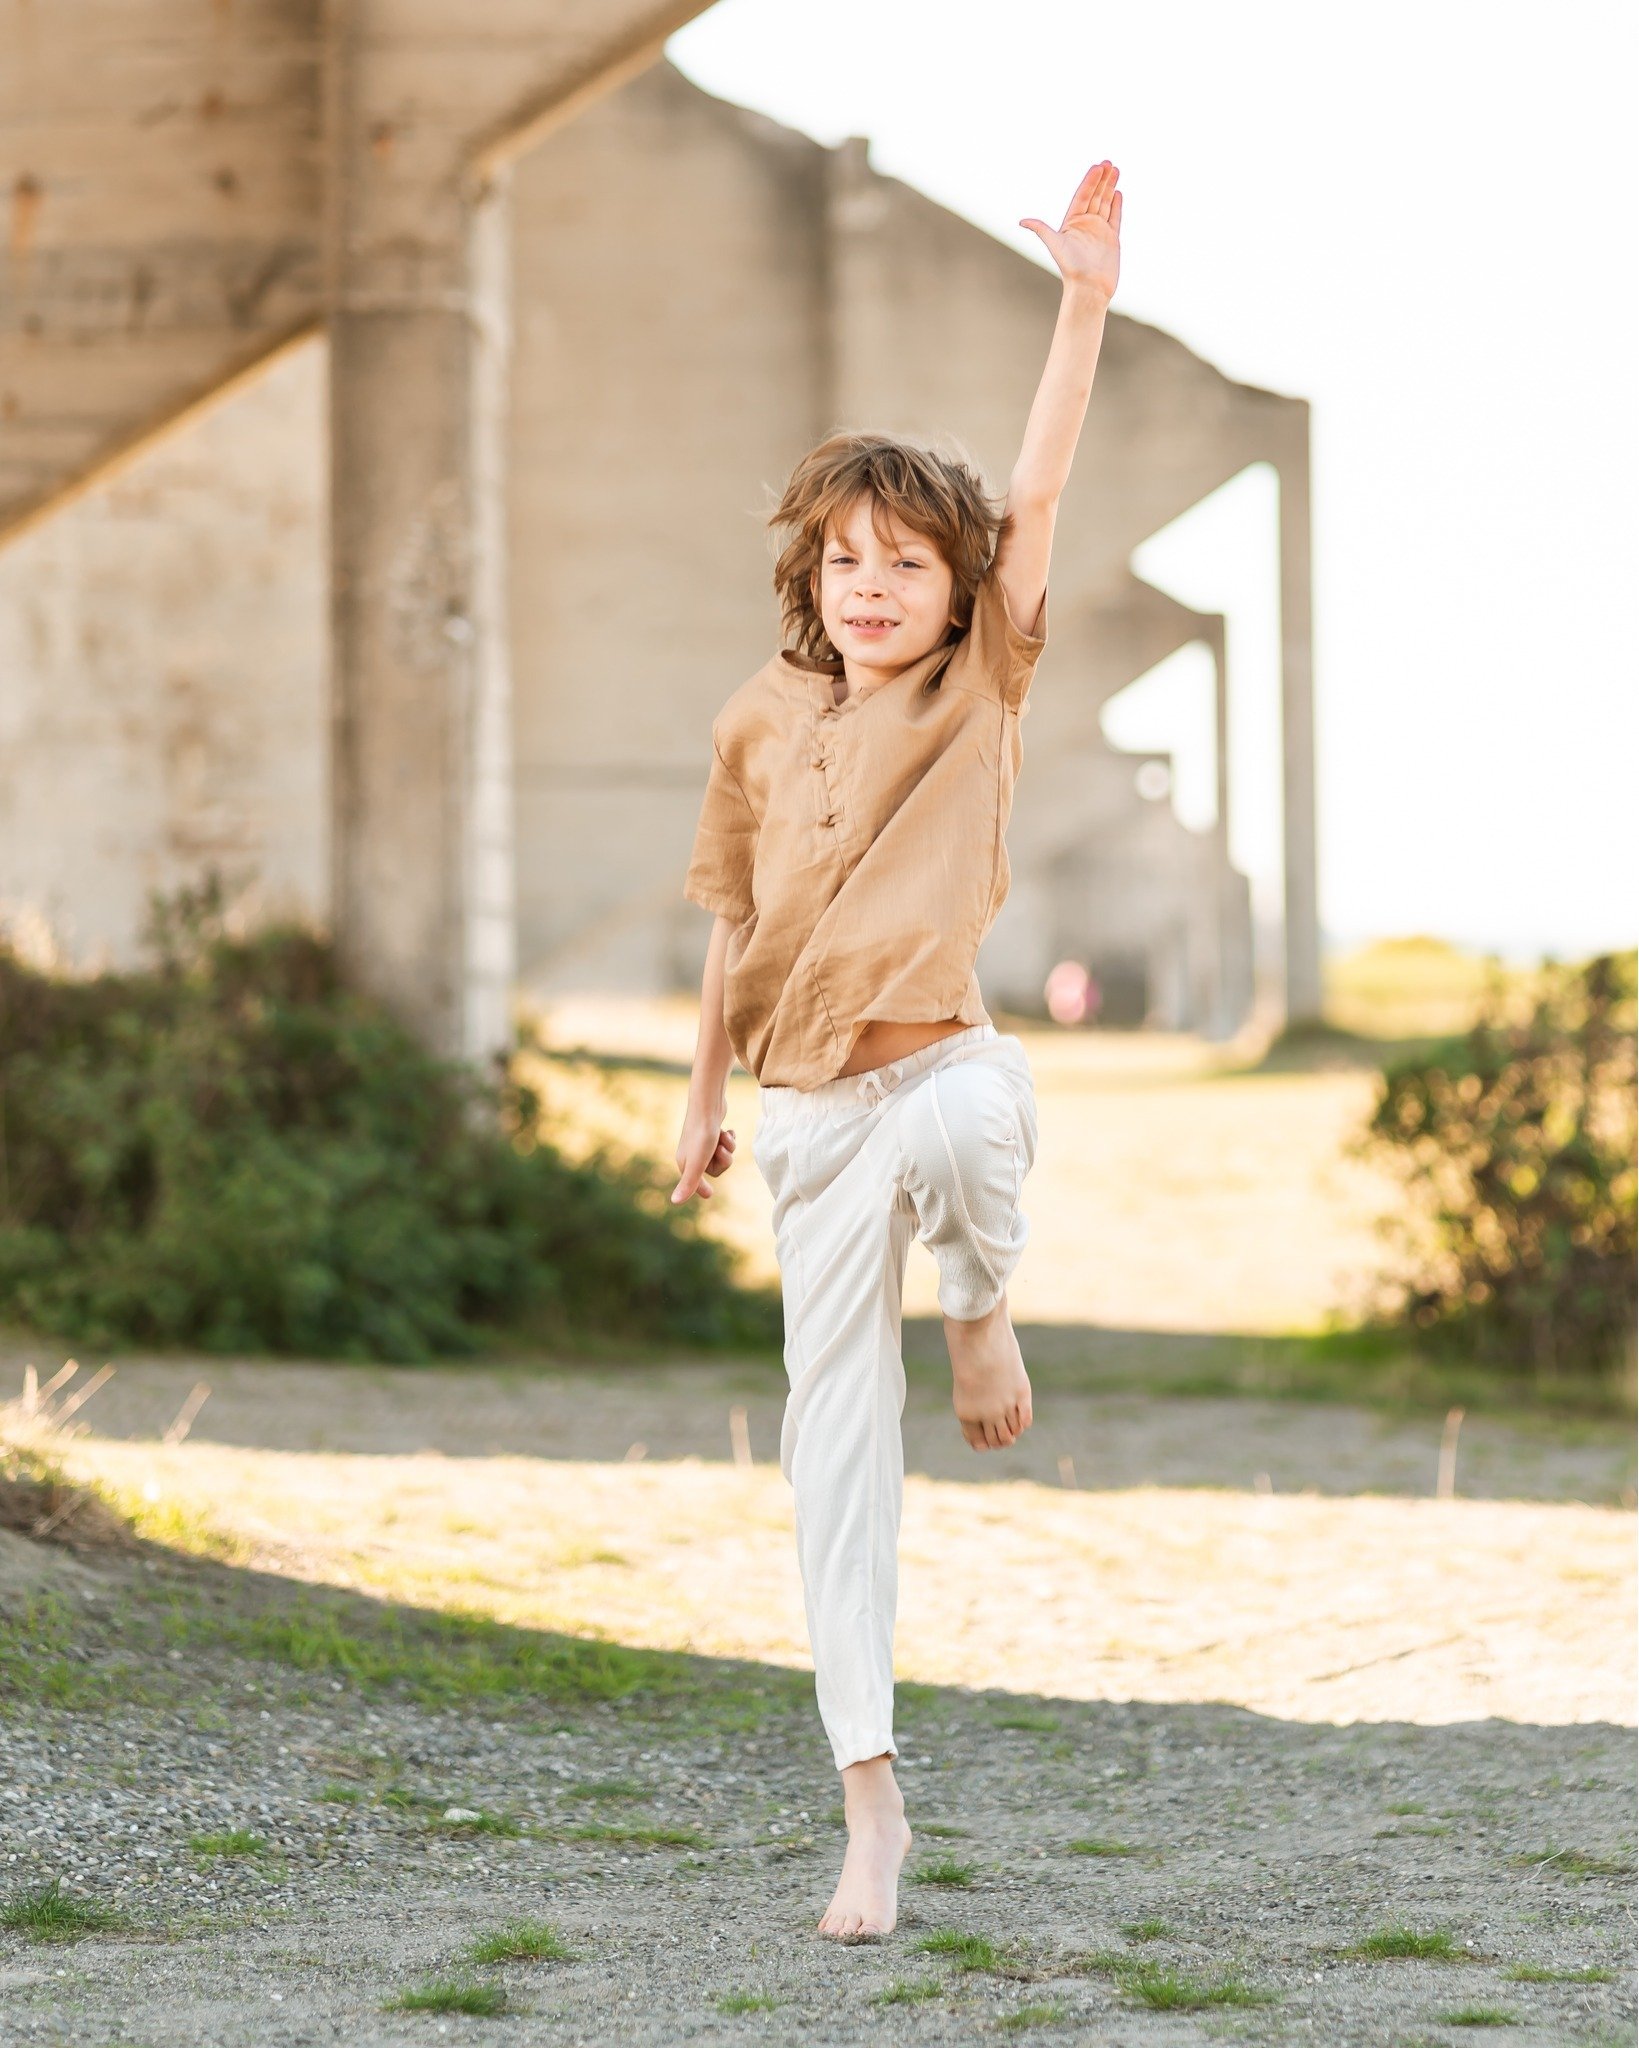 &quot;You dance love, and you dance joy, and you dance dreams.&quot; - Gene Kelly 🫶🤩✨ 

📸: @lynseystraderphotography 

#hidlacey #highimpactdance #dance #genekelly #dancephotography #laceydancestudio #laceywa #kidswhodance #danceisforeverybody